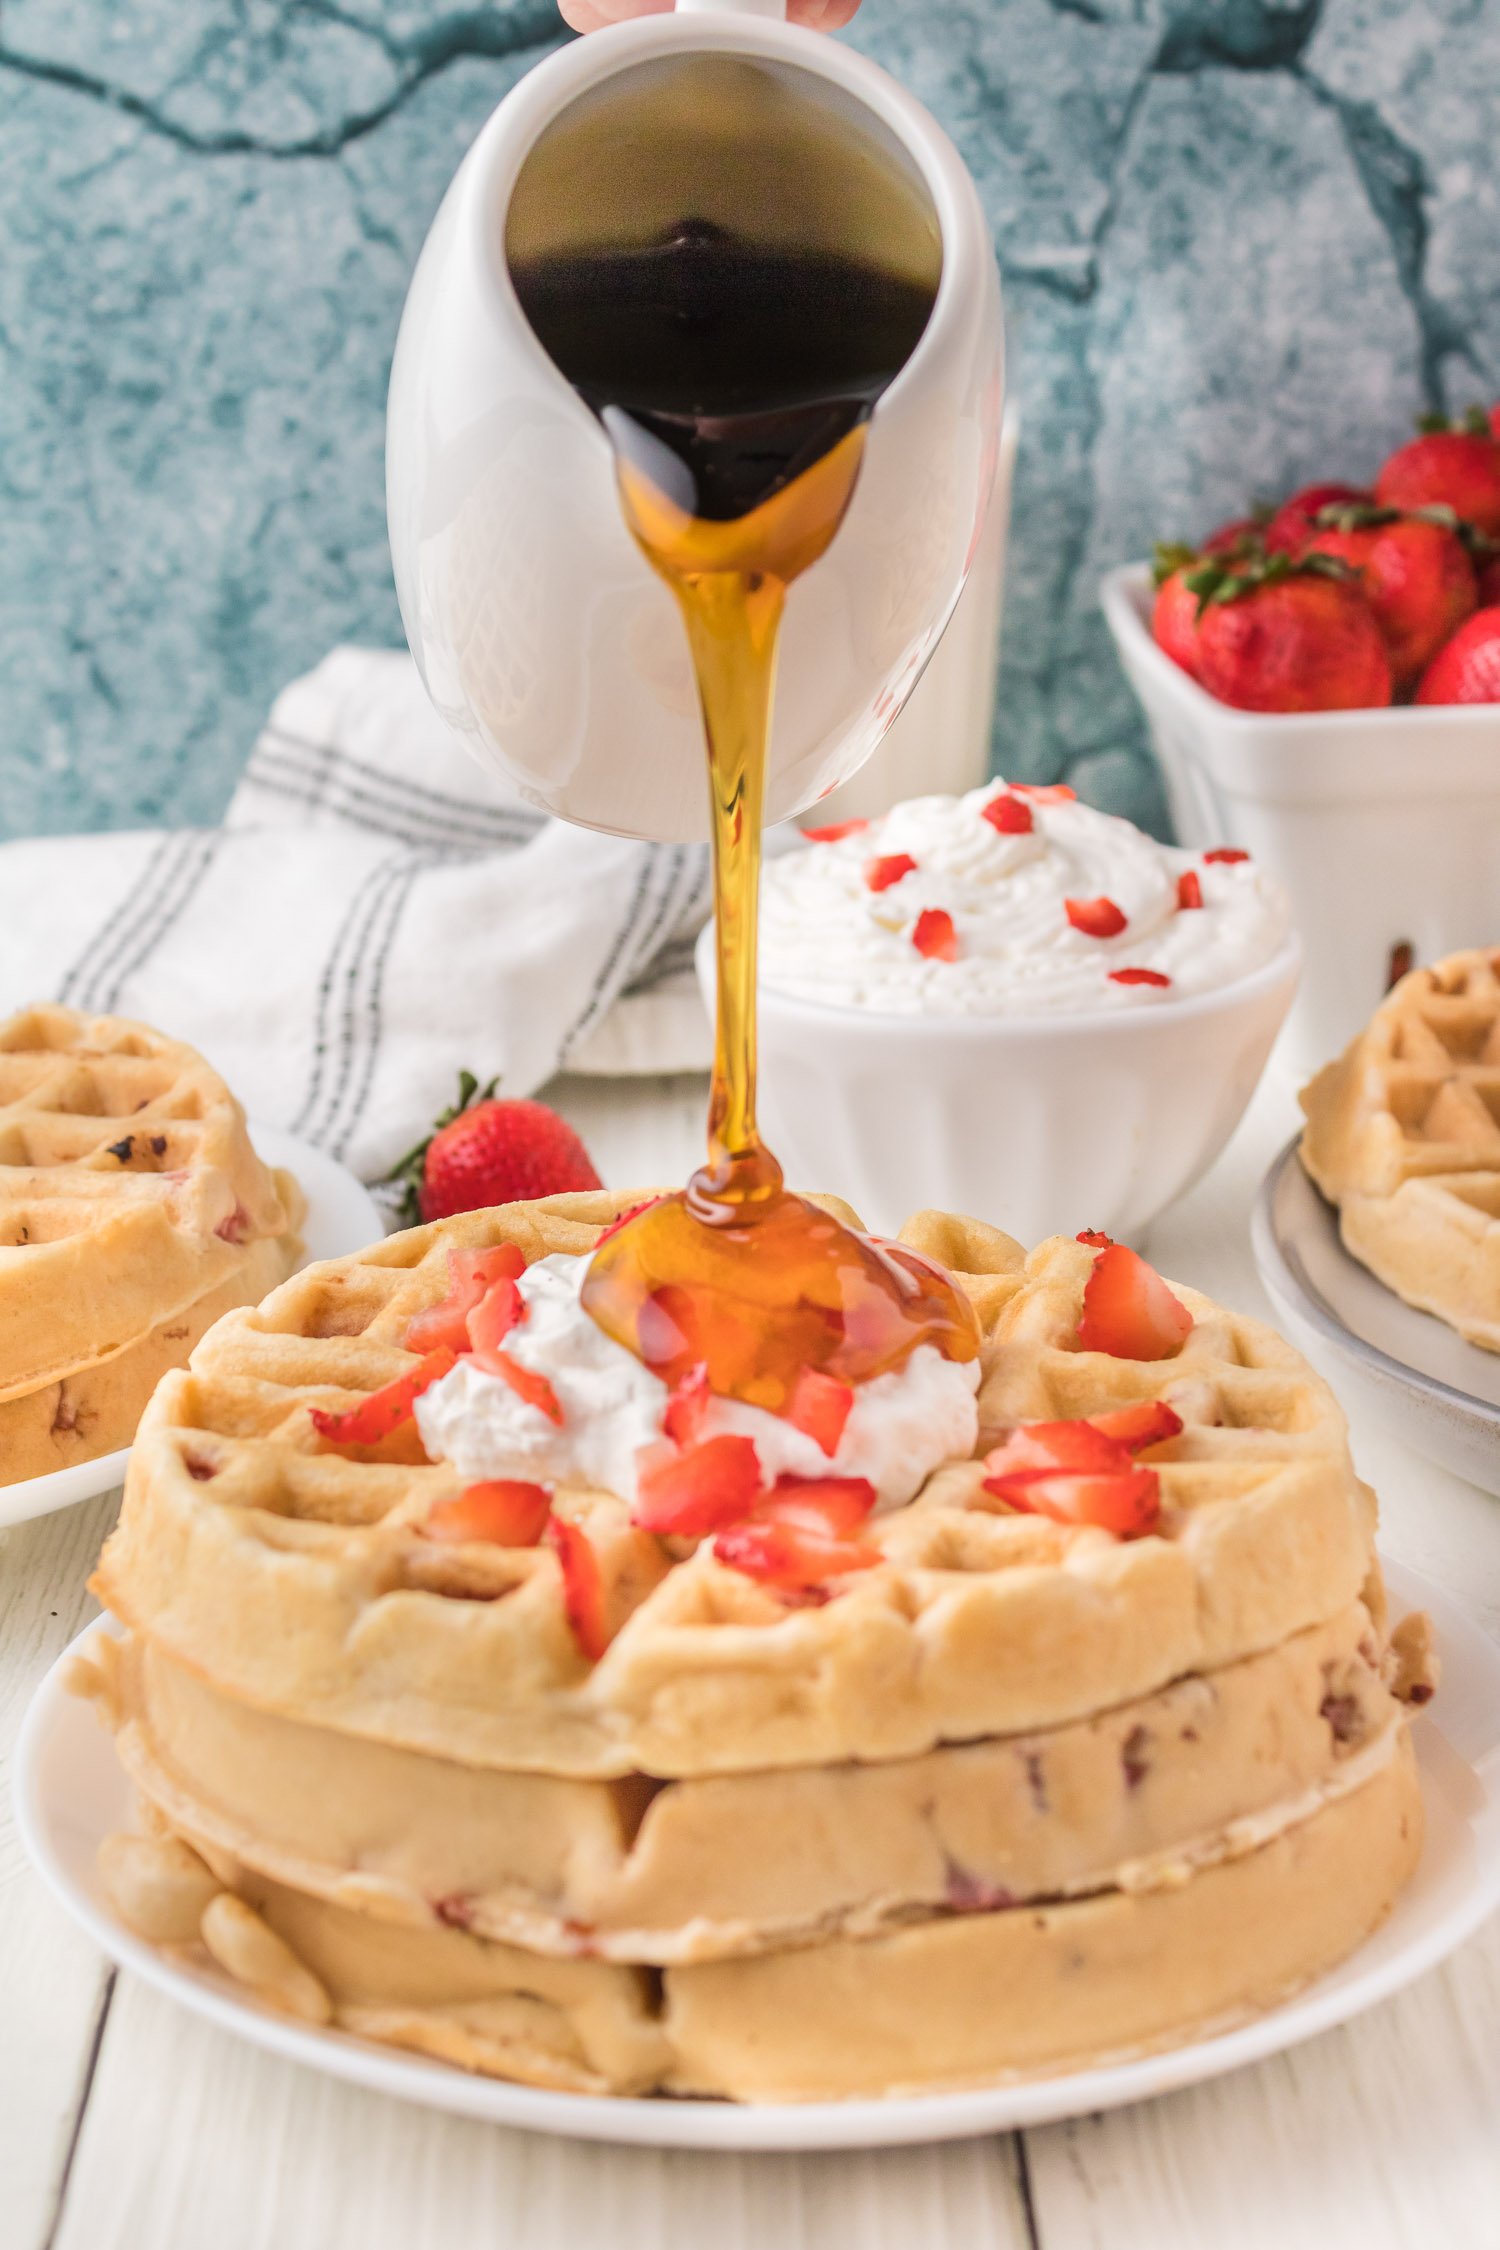 Syrup being poured on waffle.